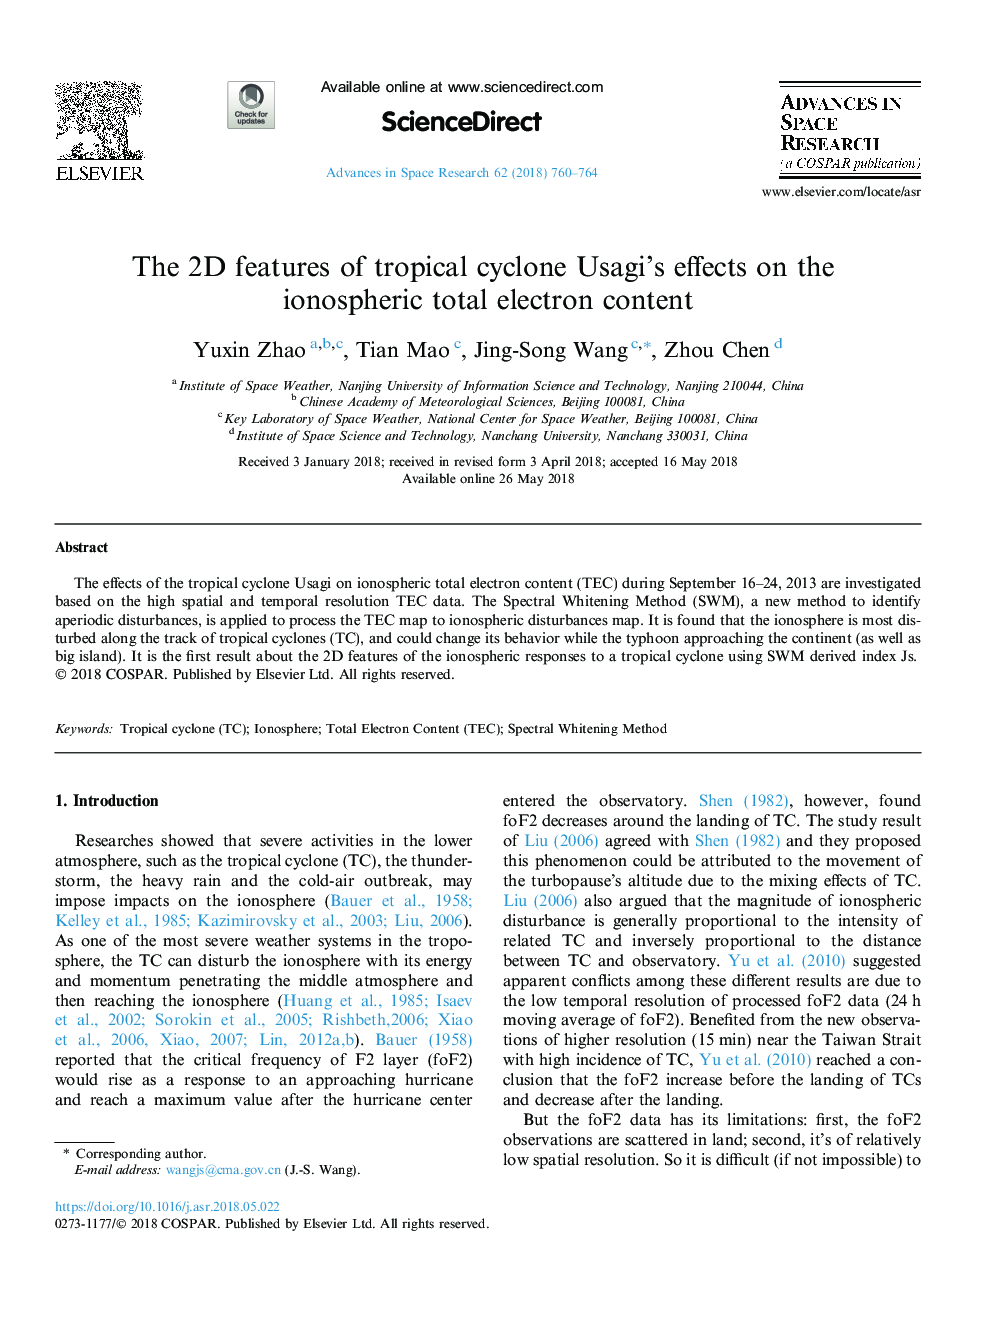 The 2D features of tropical cyclone Usagi's effects on the ionospheric total electron content